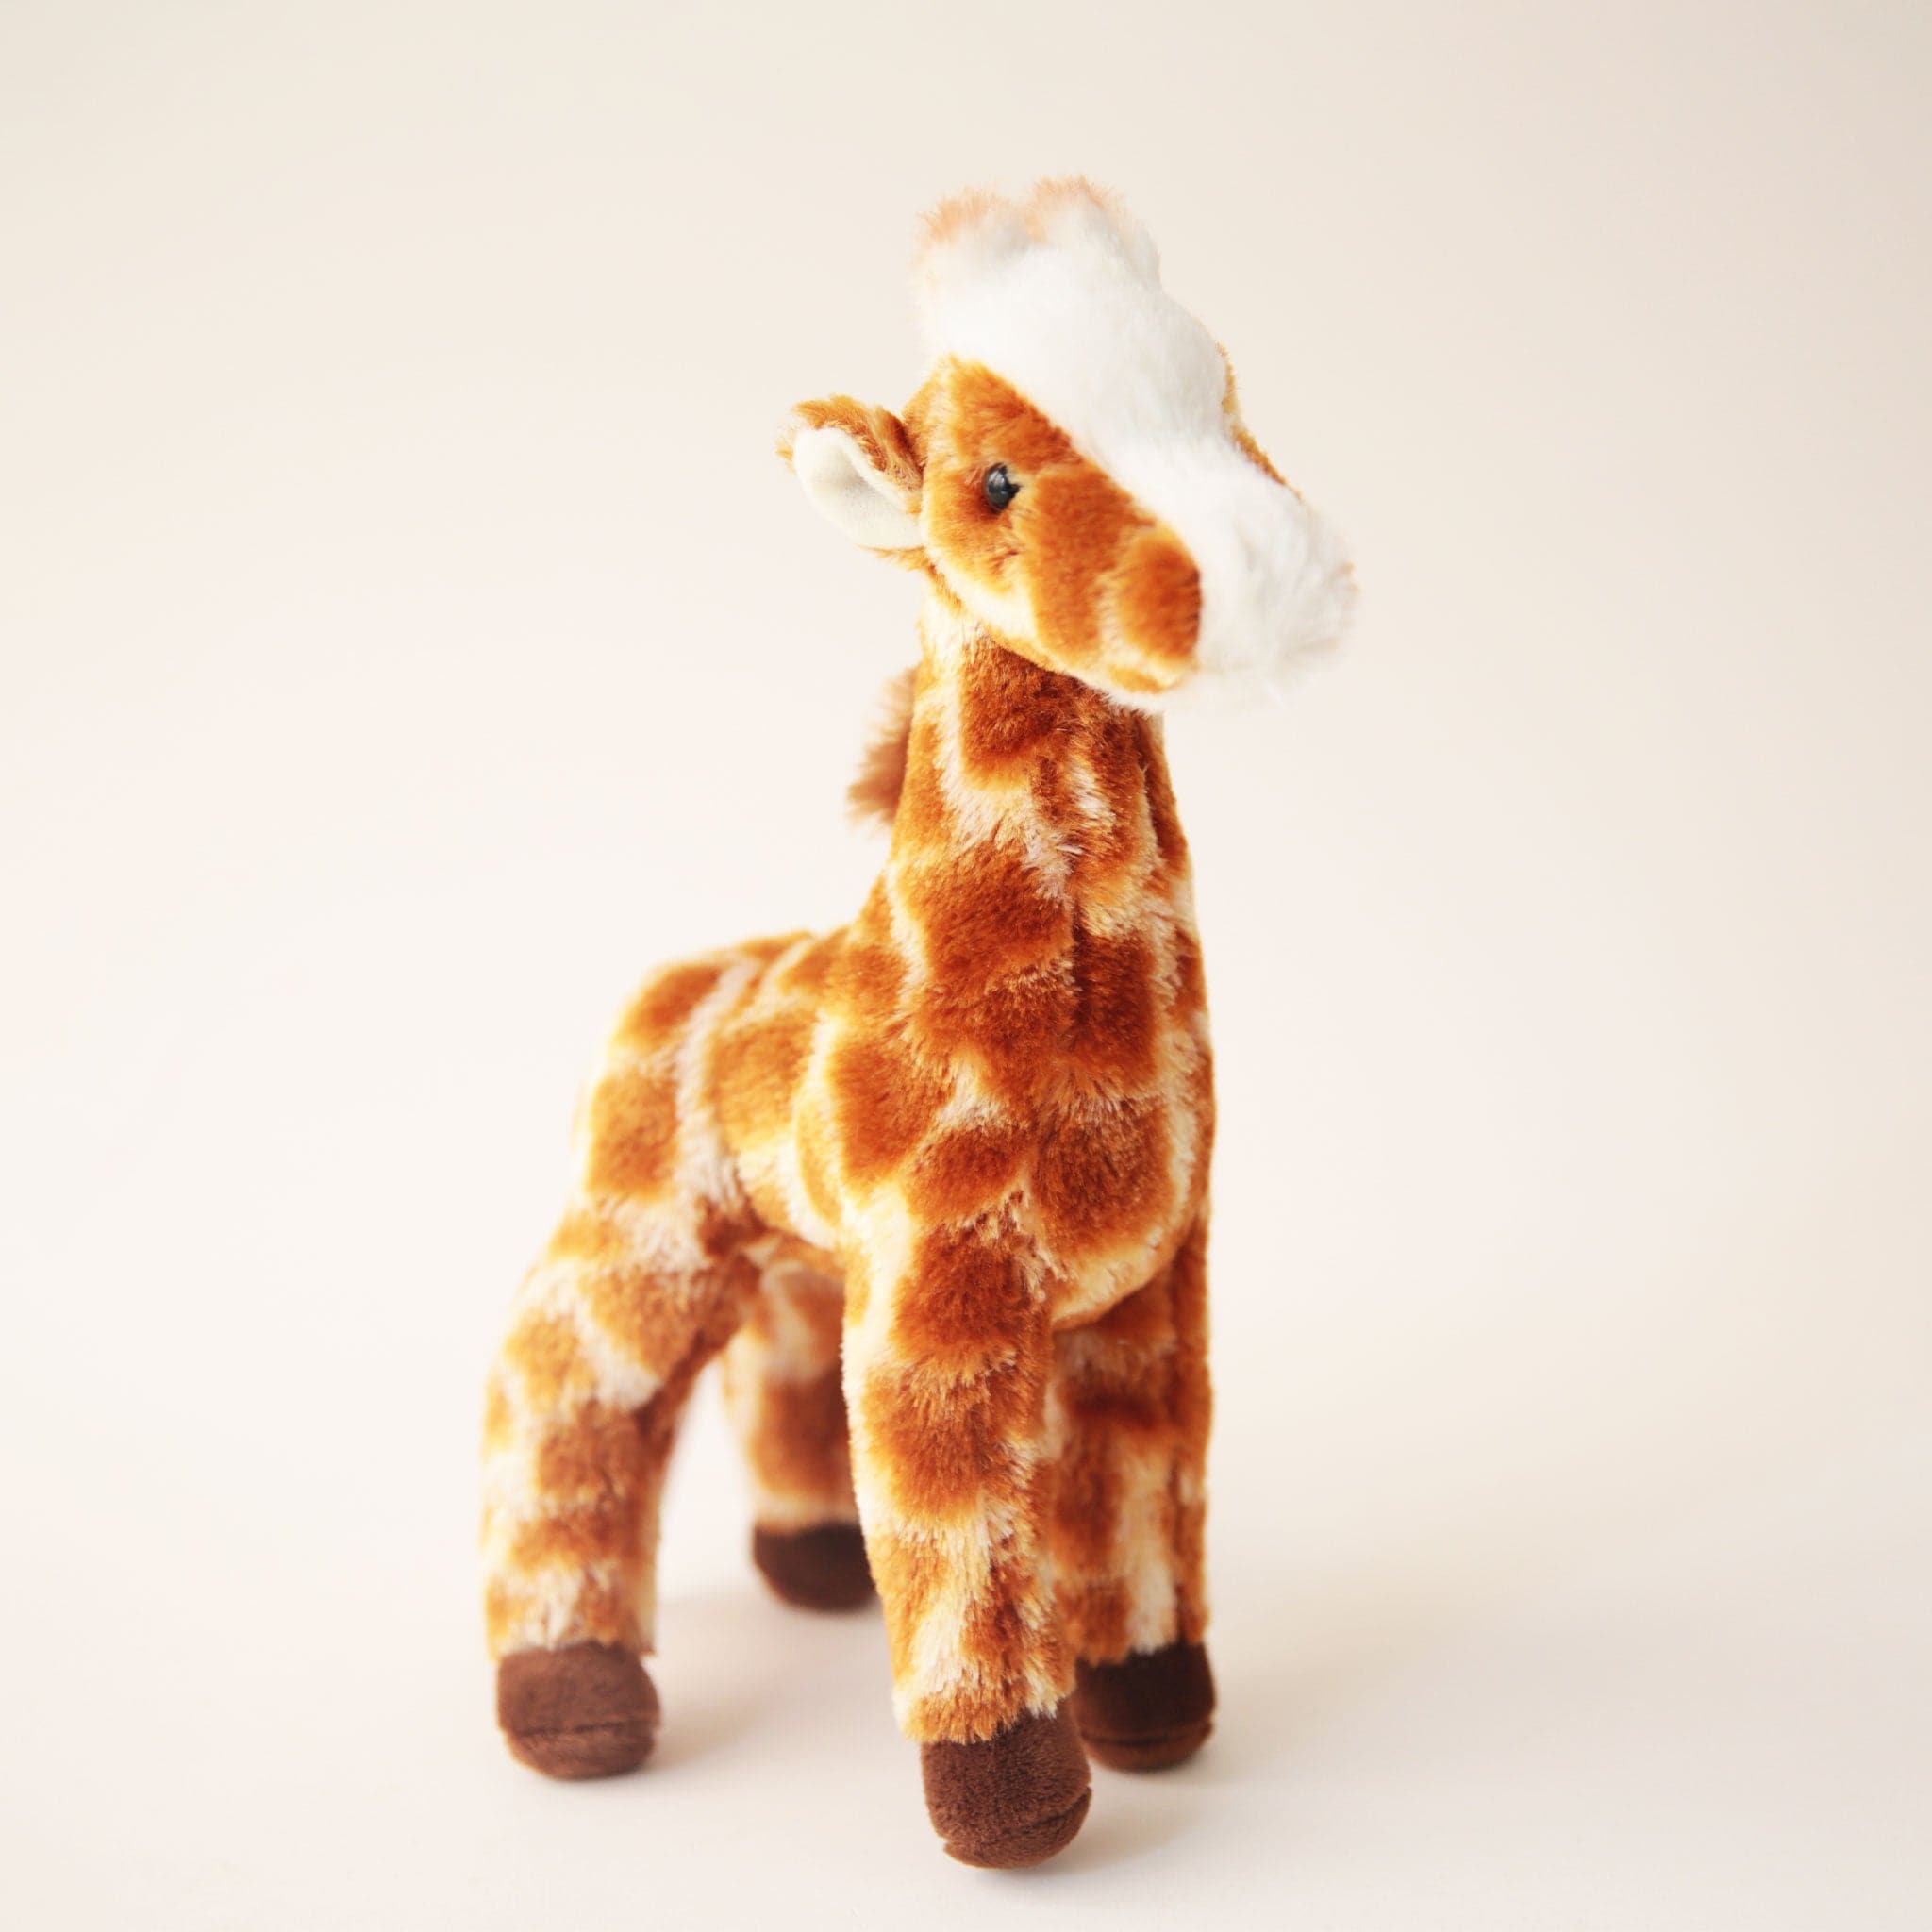 A brown and white giraffe stuffed animal toy with chocolate brown hooves. 